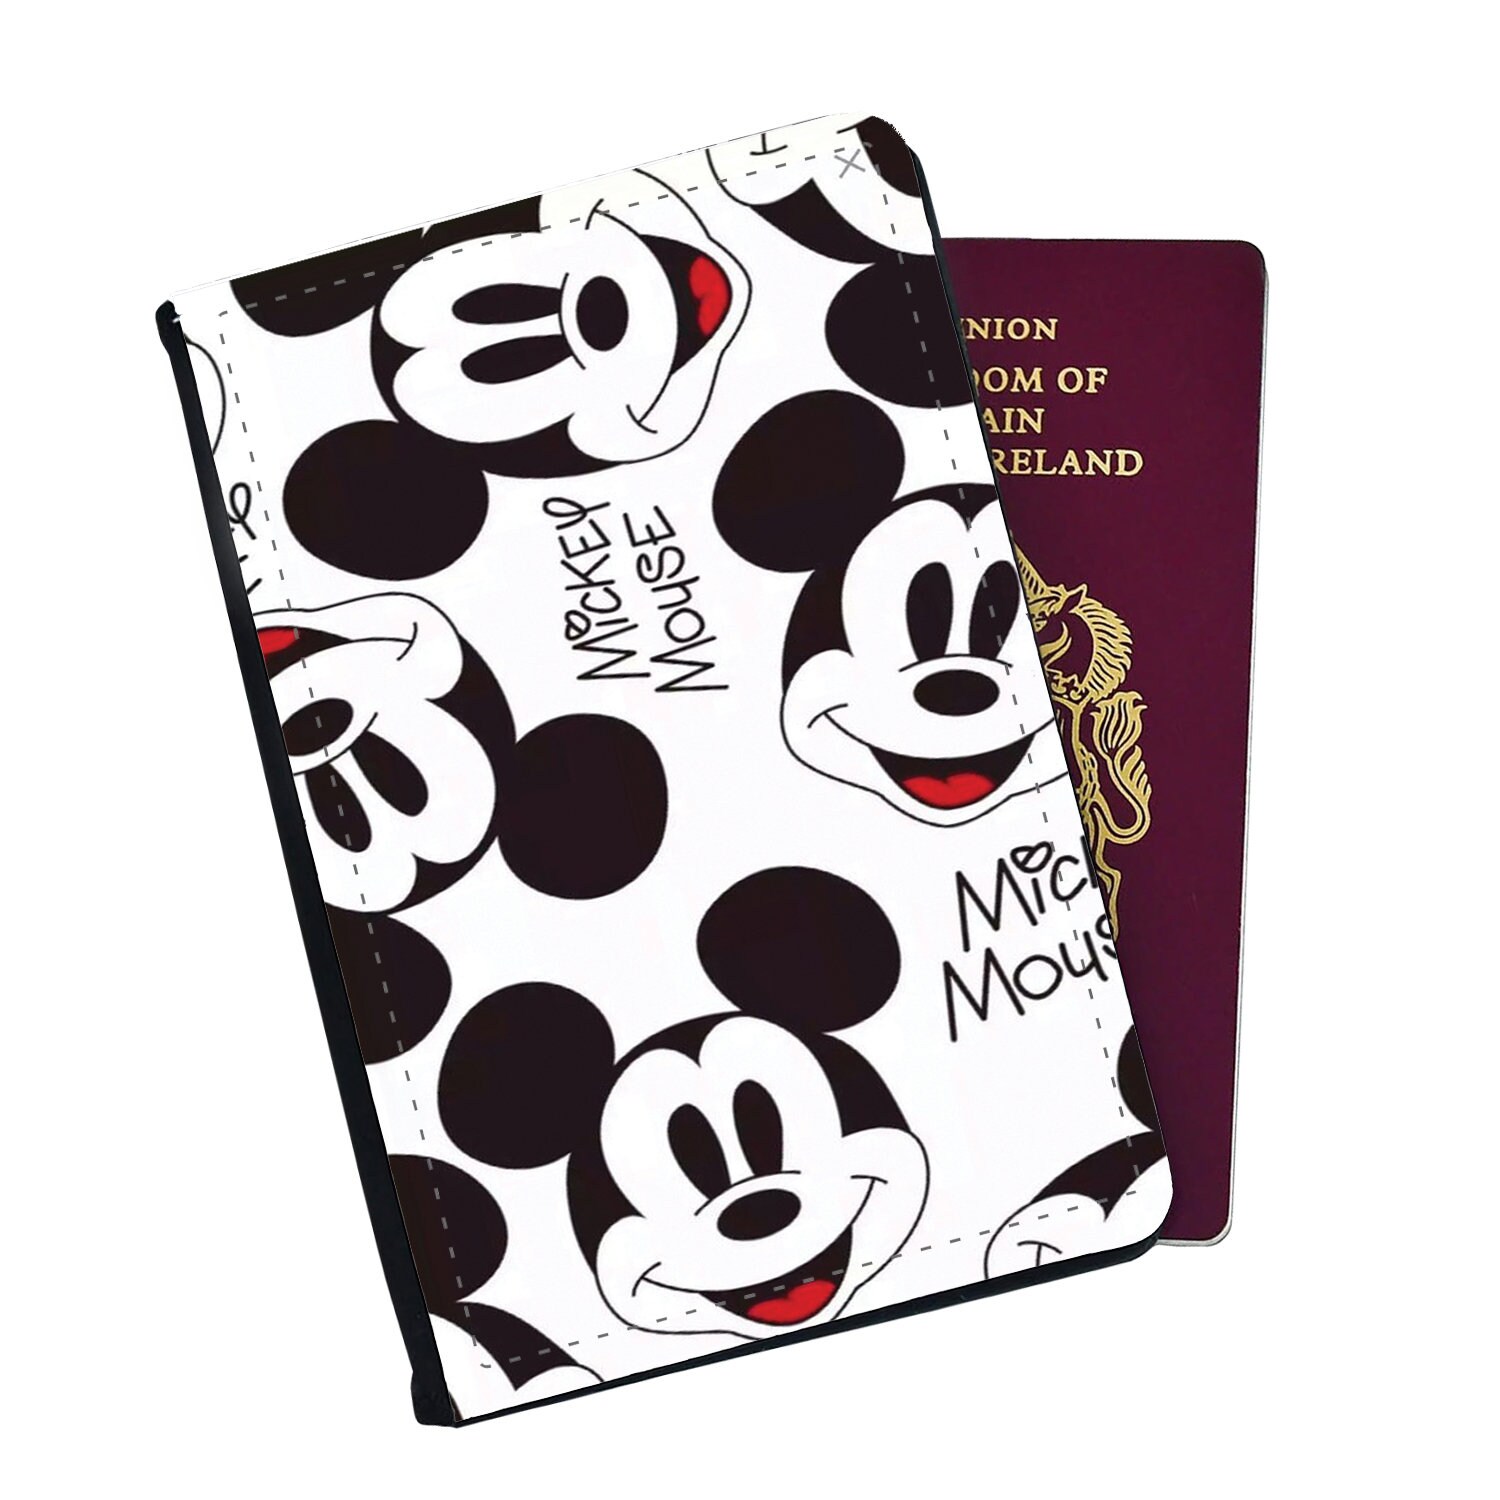 Disney-inspired Personalised Passport Cover & Luggage Tag